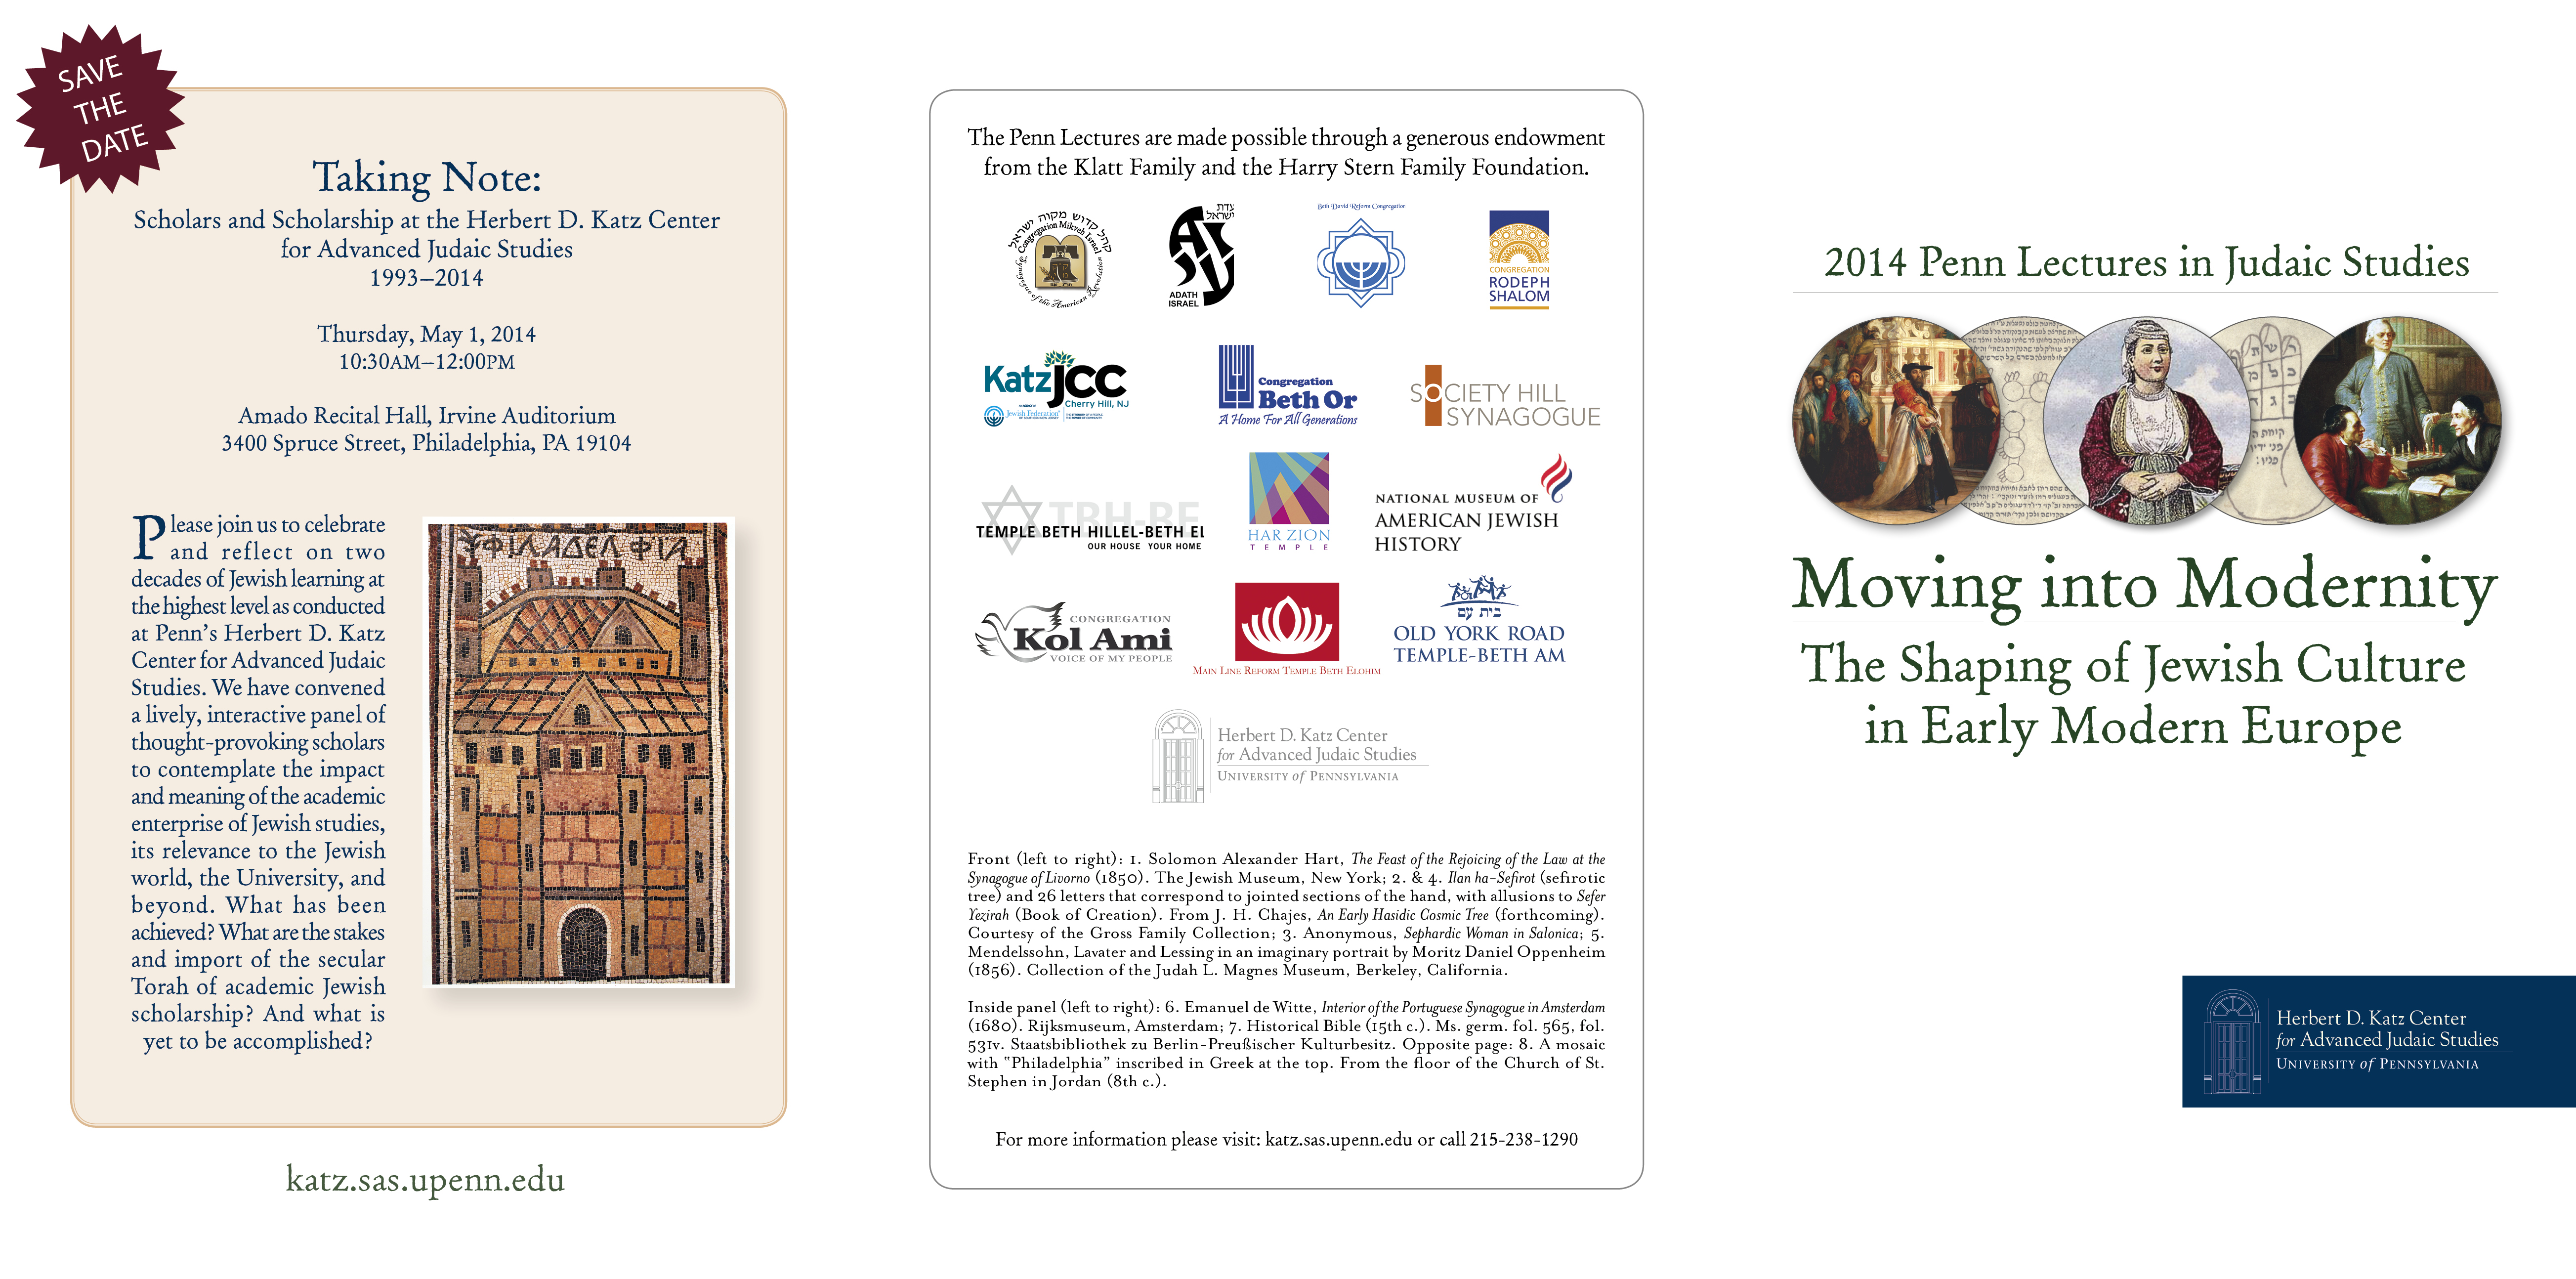 Moving into Modernity: The Shaping of Jewish Culture in Early Modern Europe